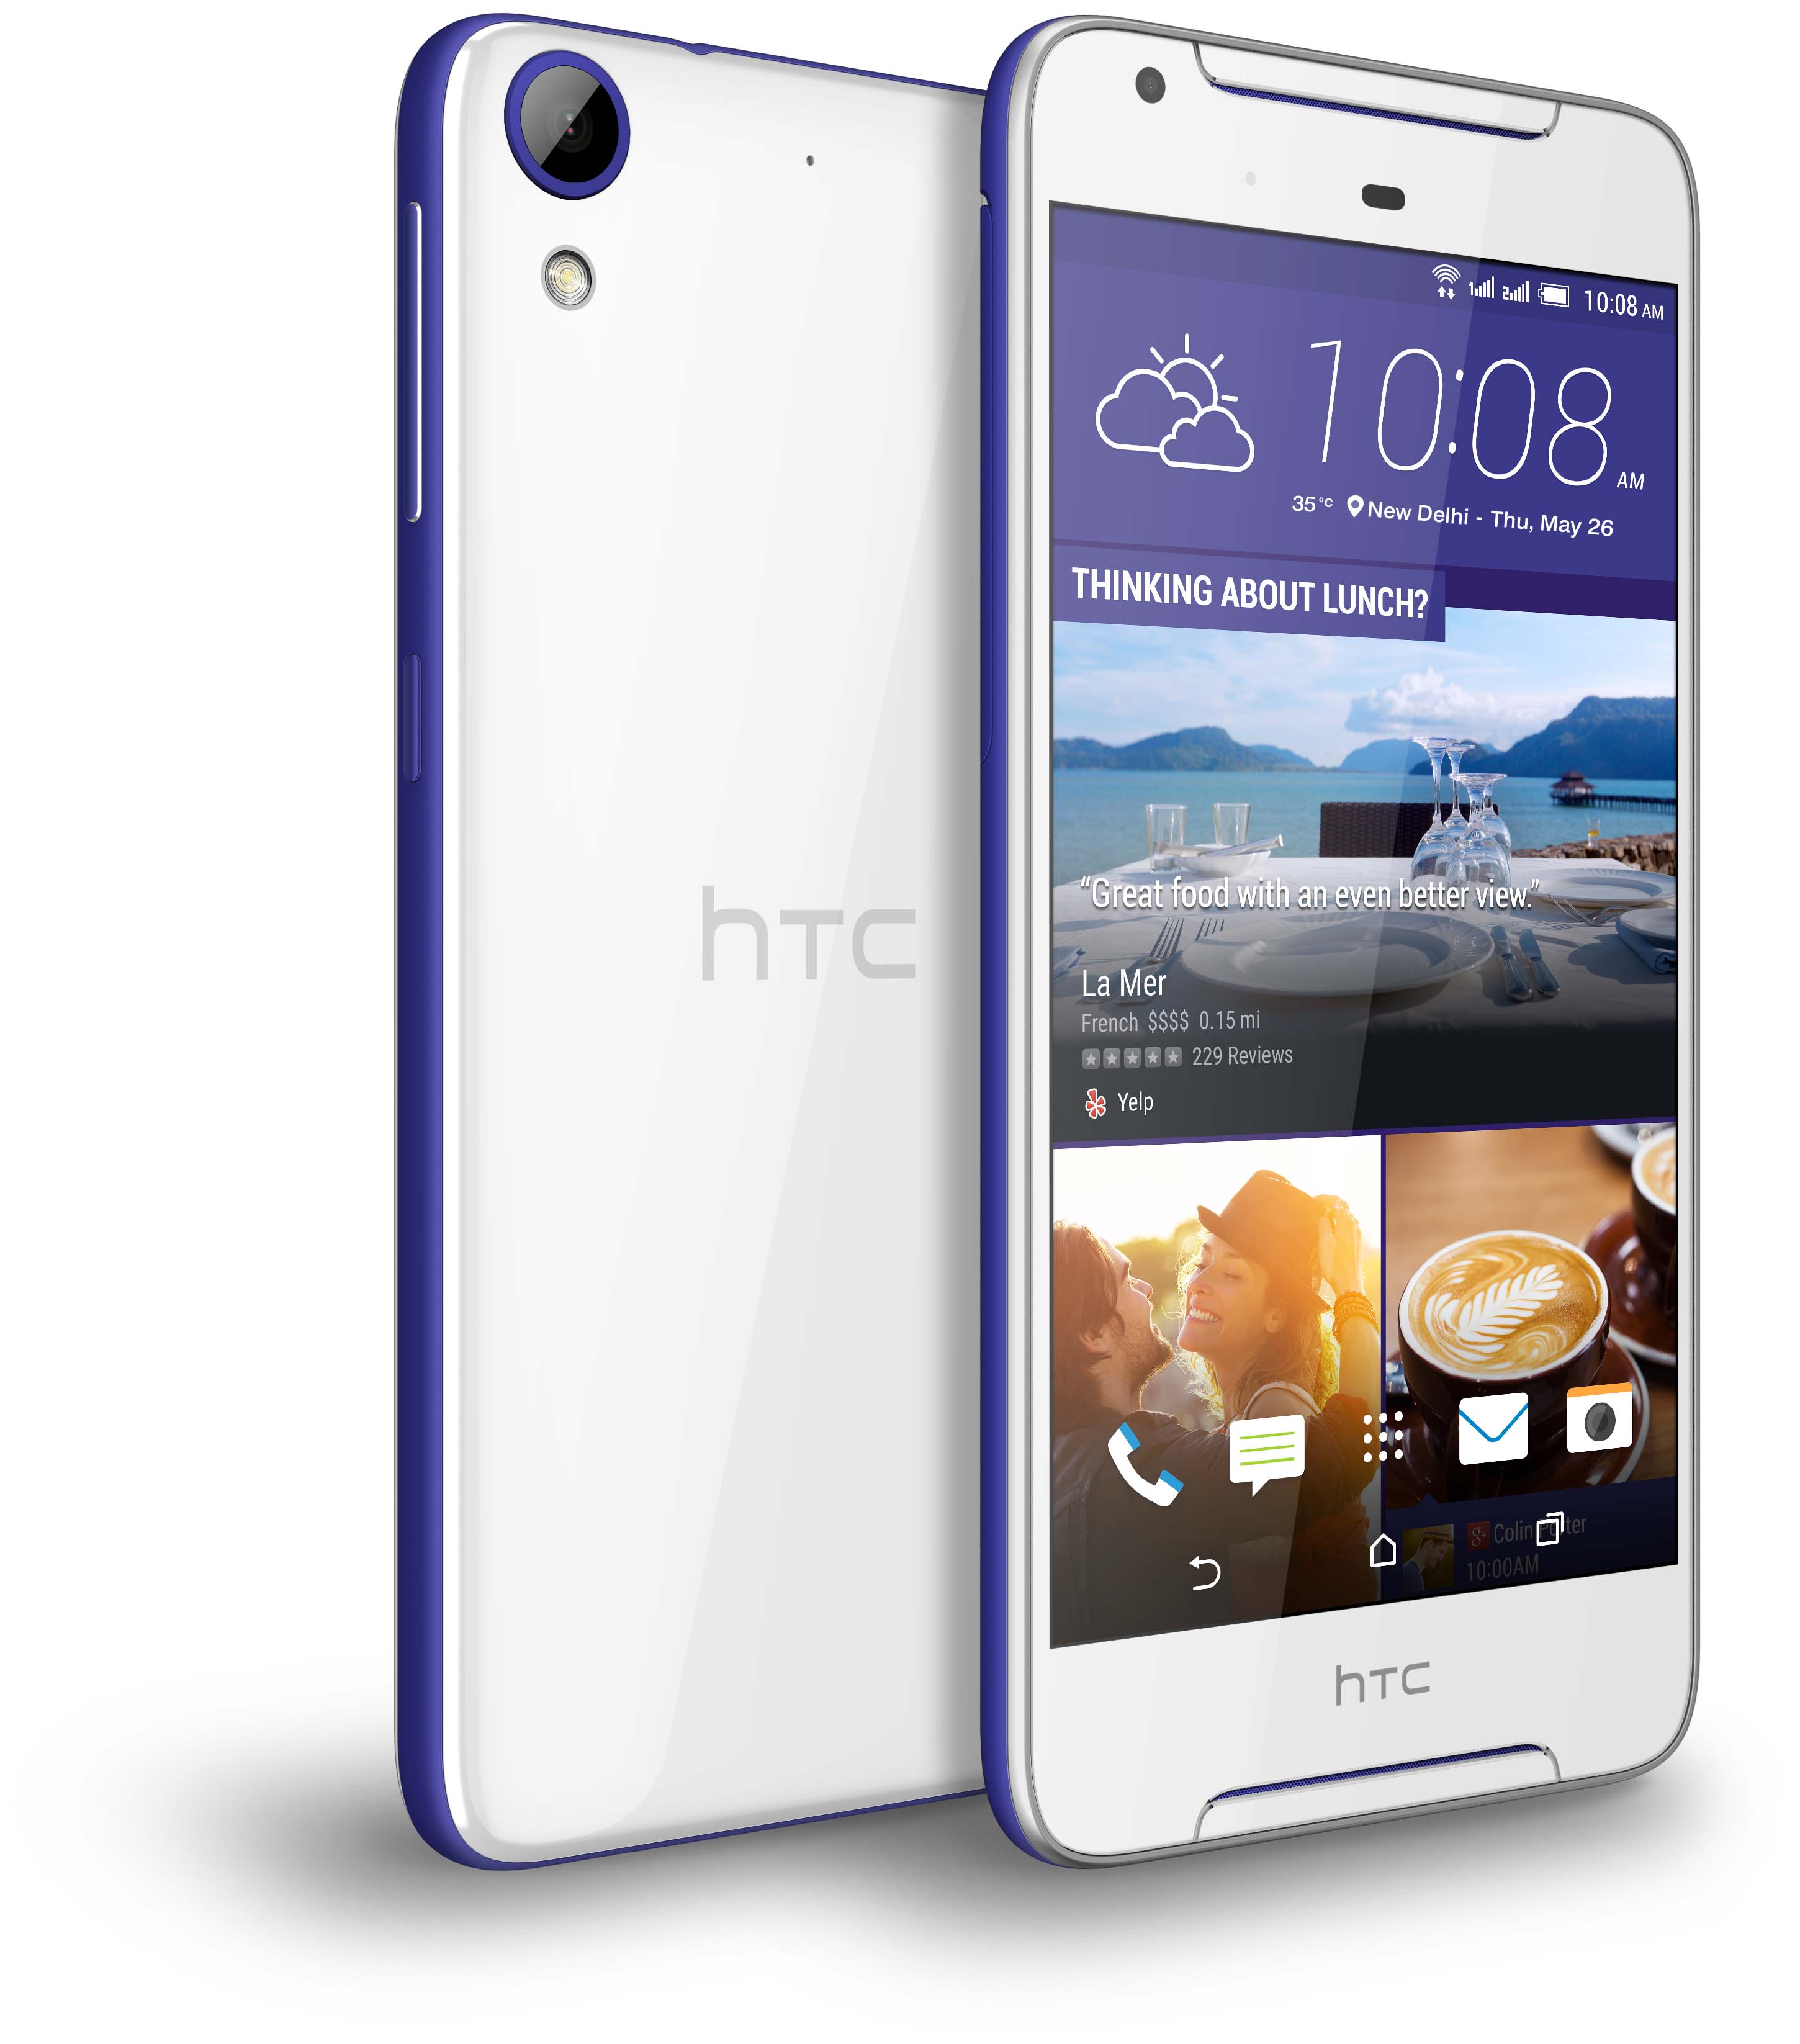 HTC Desire 628 Dual SIM now available in Malaysia